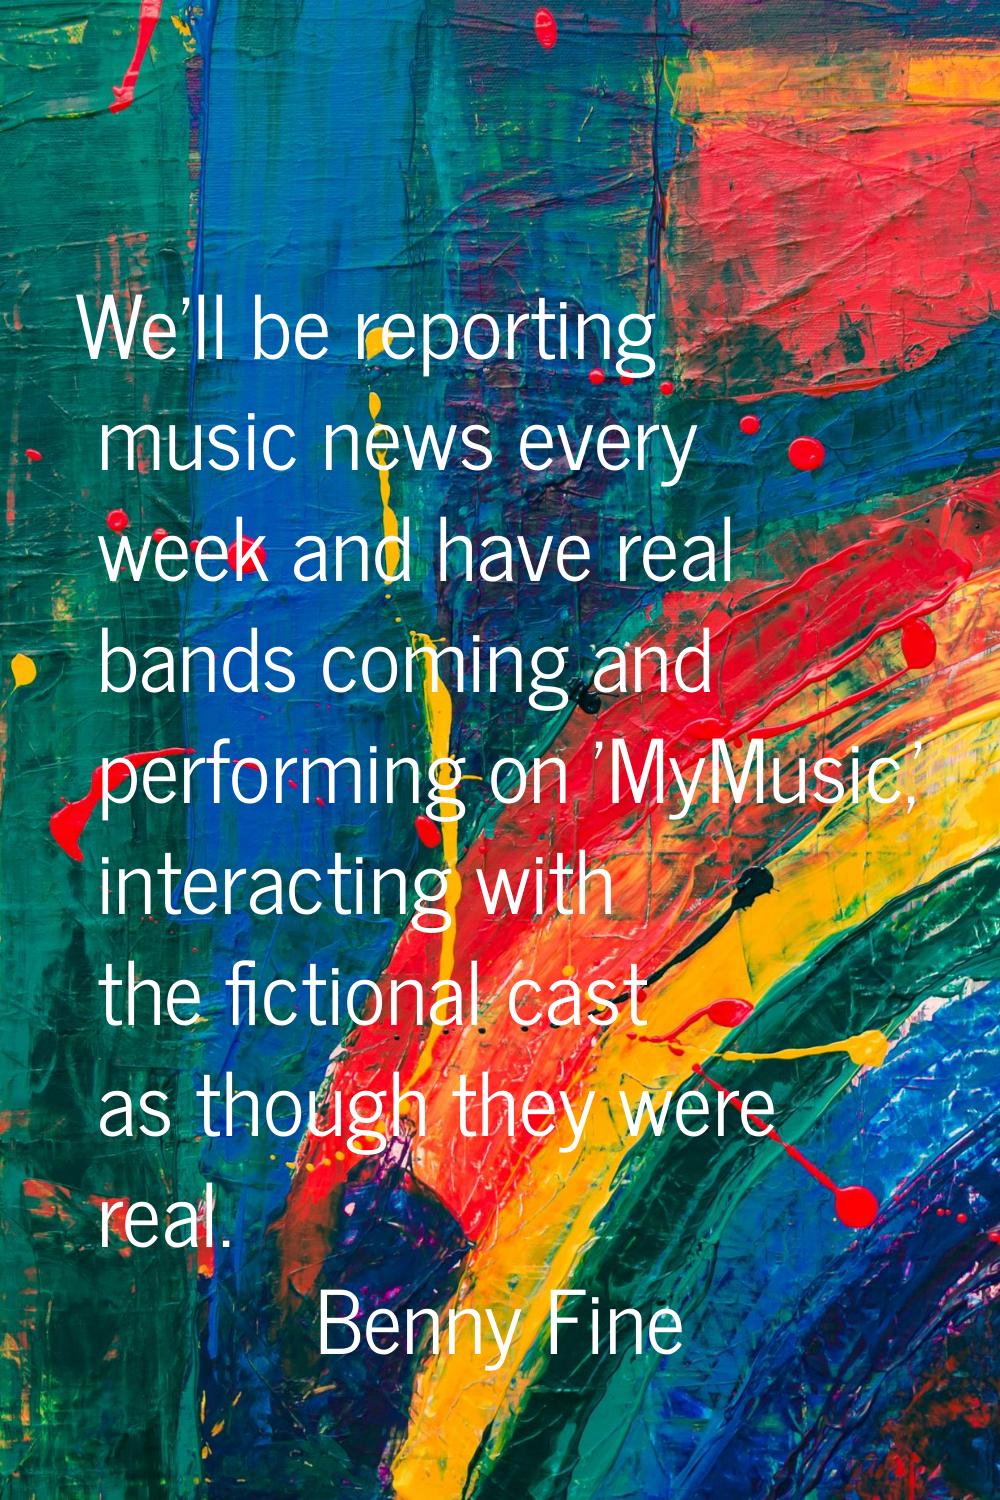 We'll be reporting music news every week and have real bands coming and performing on 'MyMusic,' in